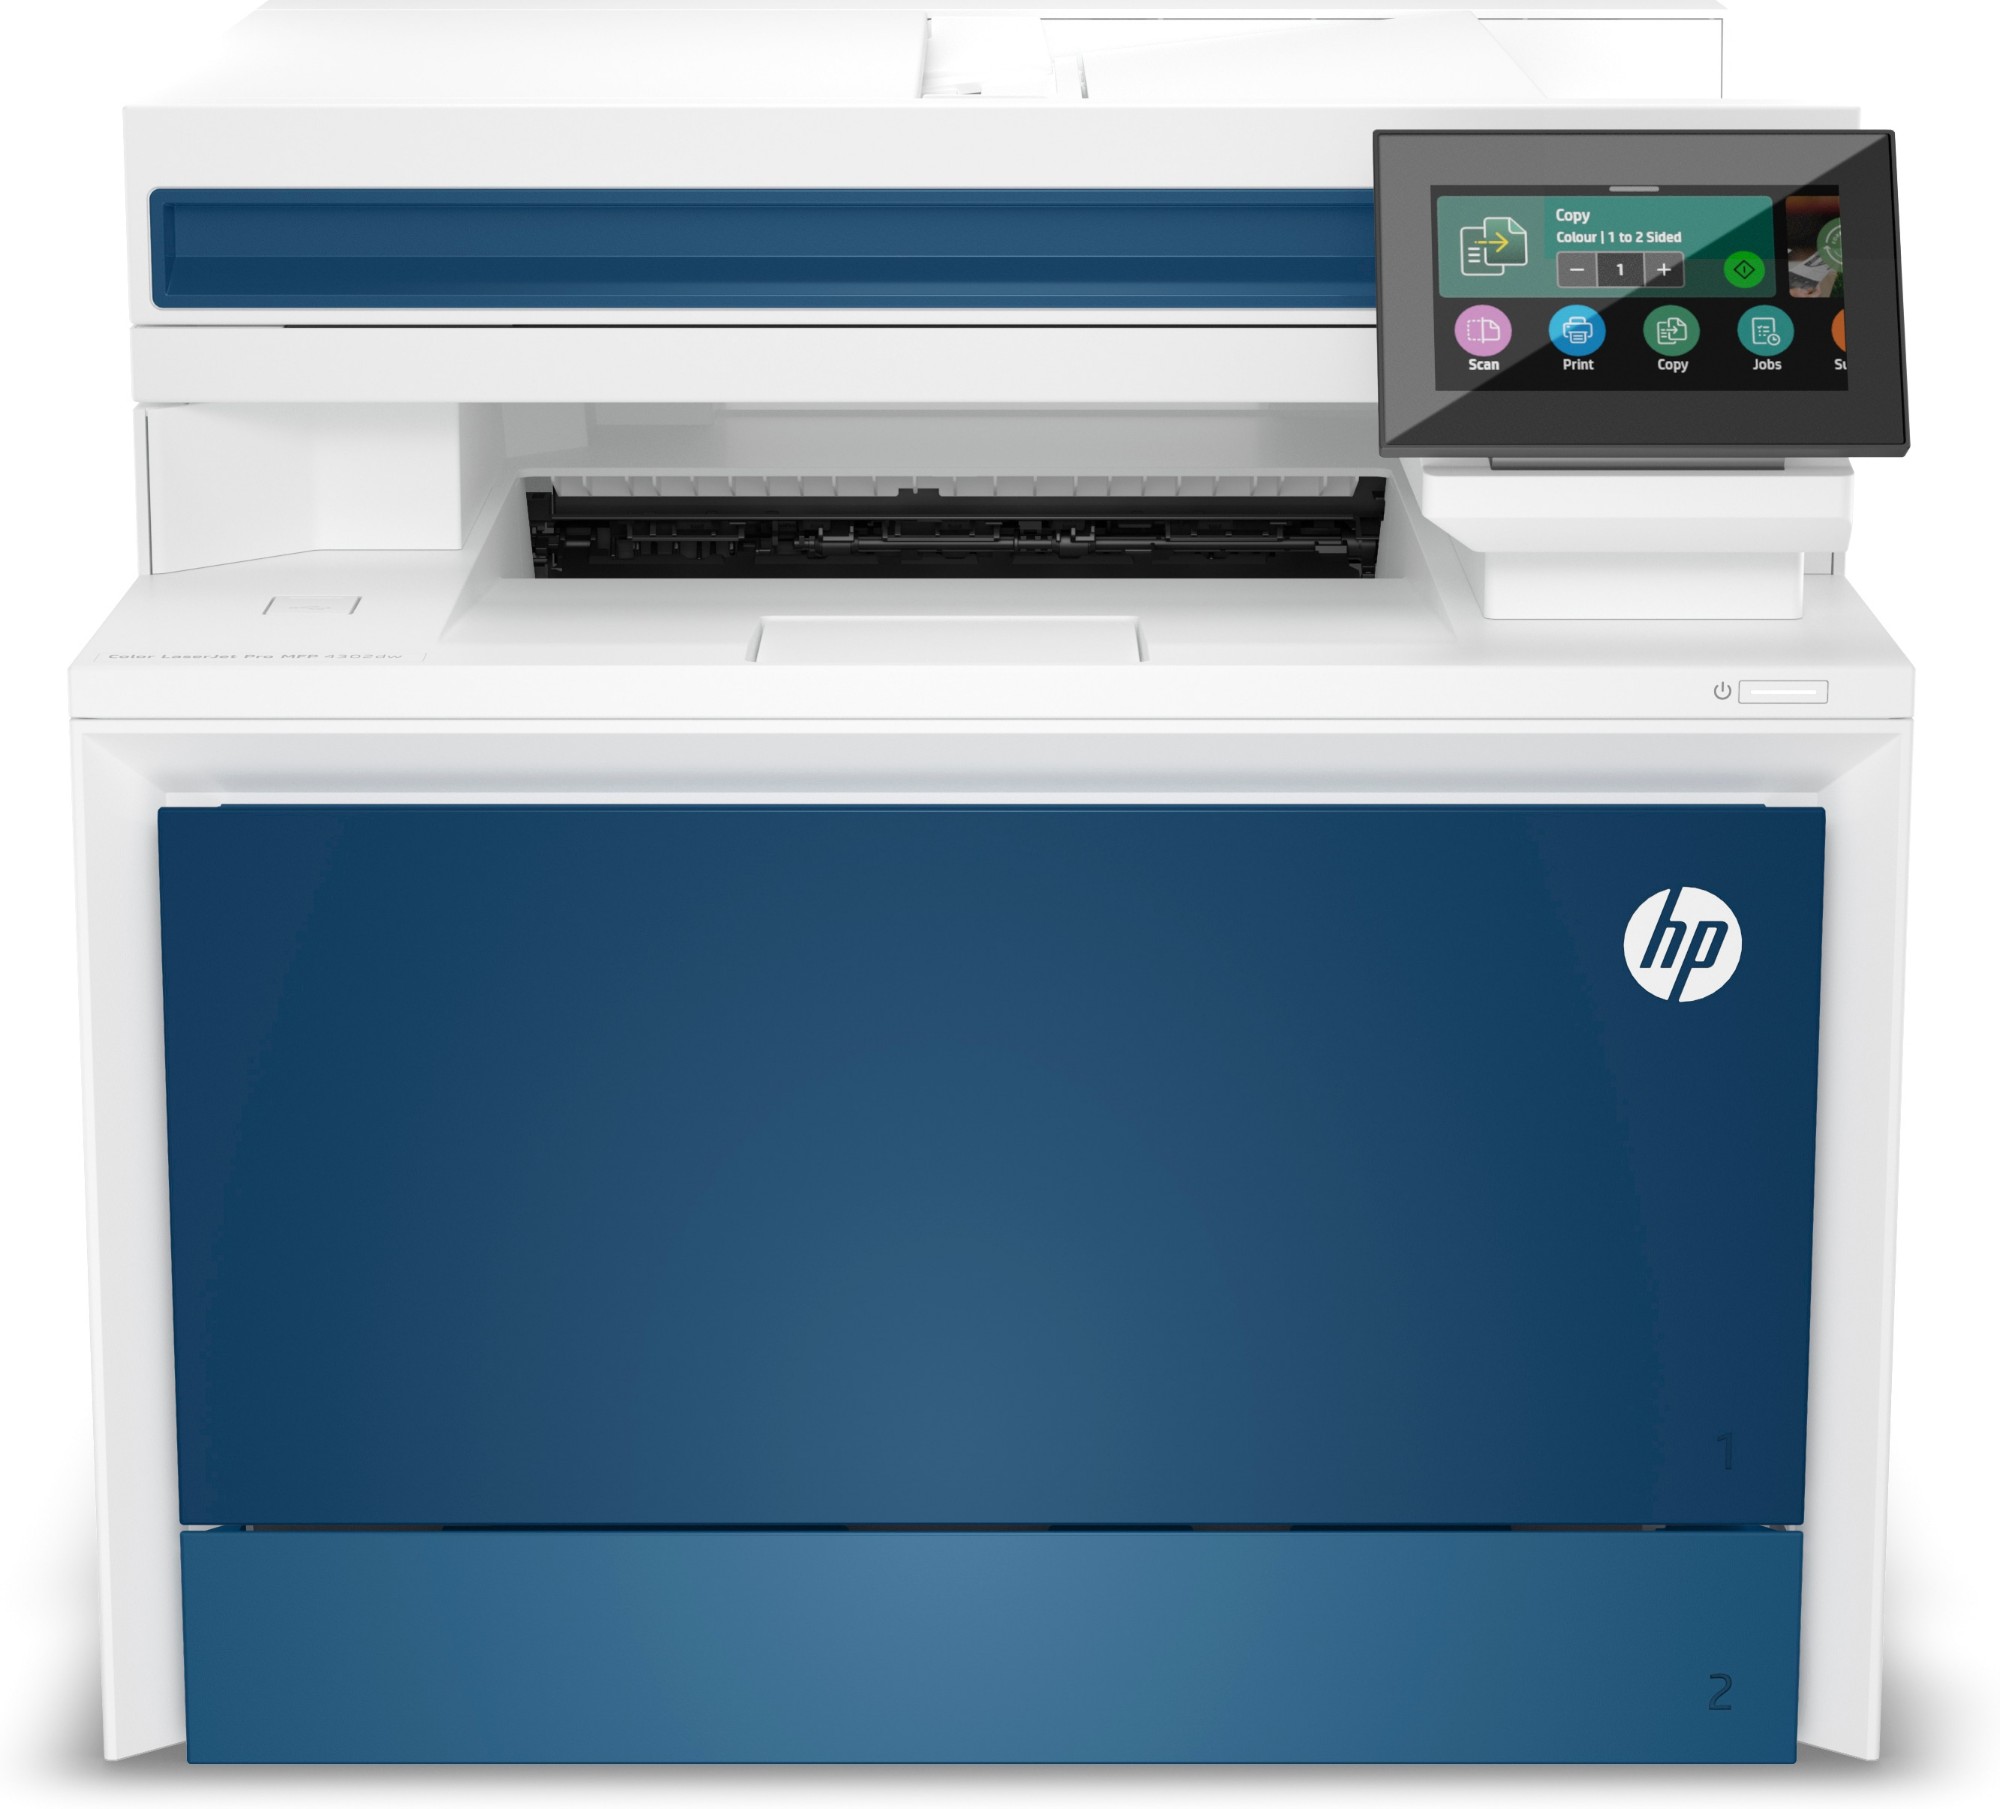 HP Colour LaserJet Pro MFP 4302dw Printer, Colour, Printer for Small medium business, Print, copy, scan, Wireless; Print from phone or tablet; Automatic document feeder